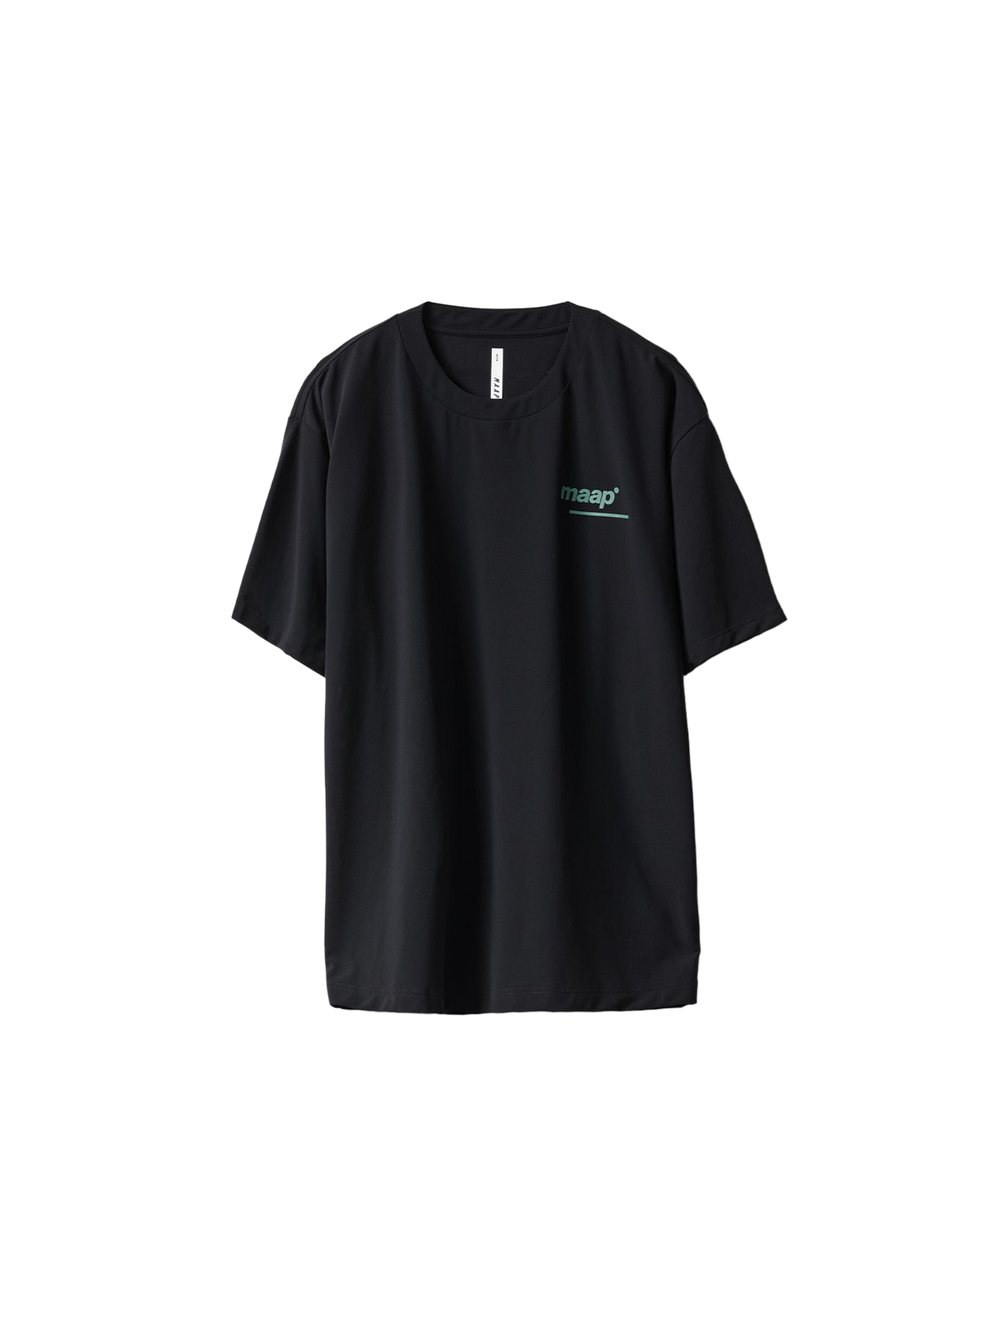 Product Image for Training Tee